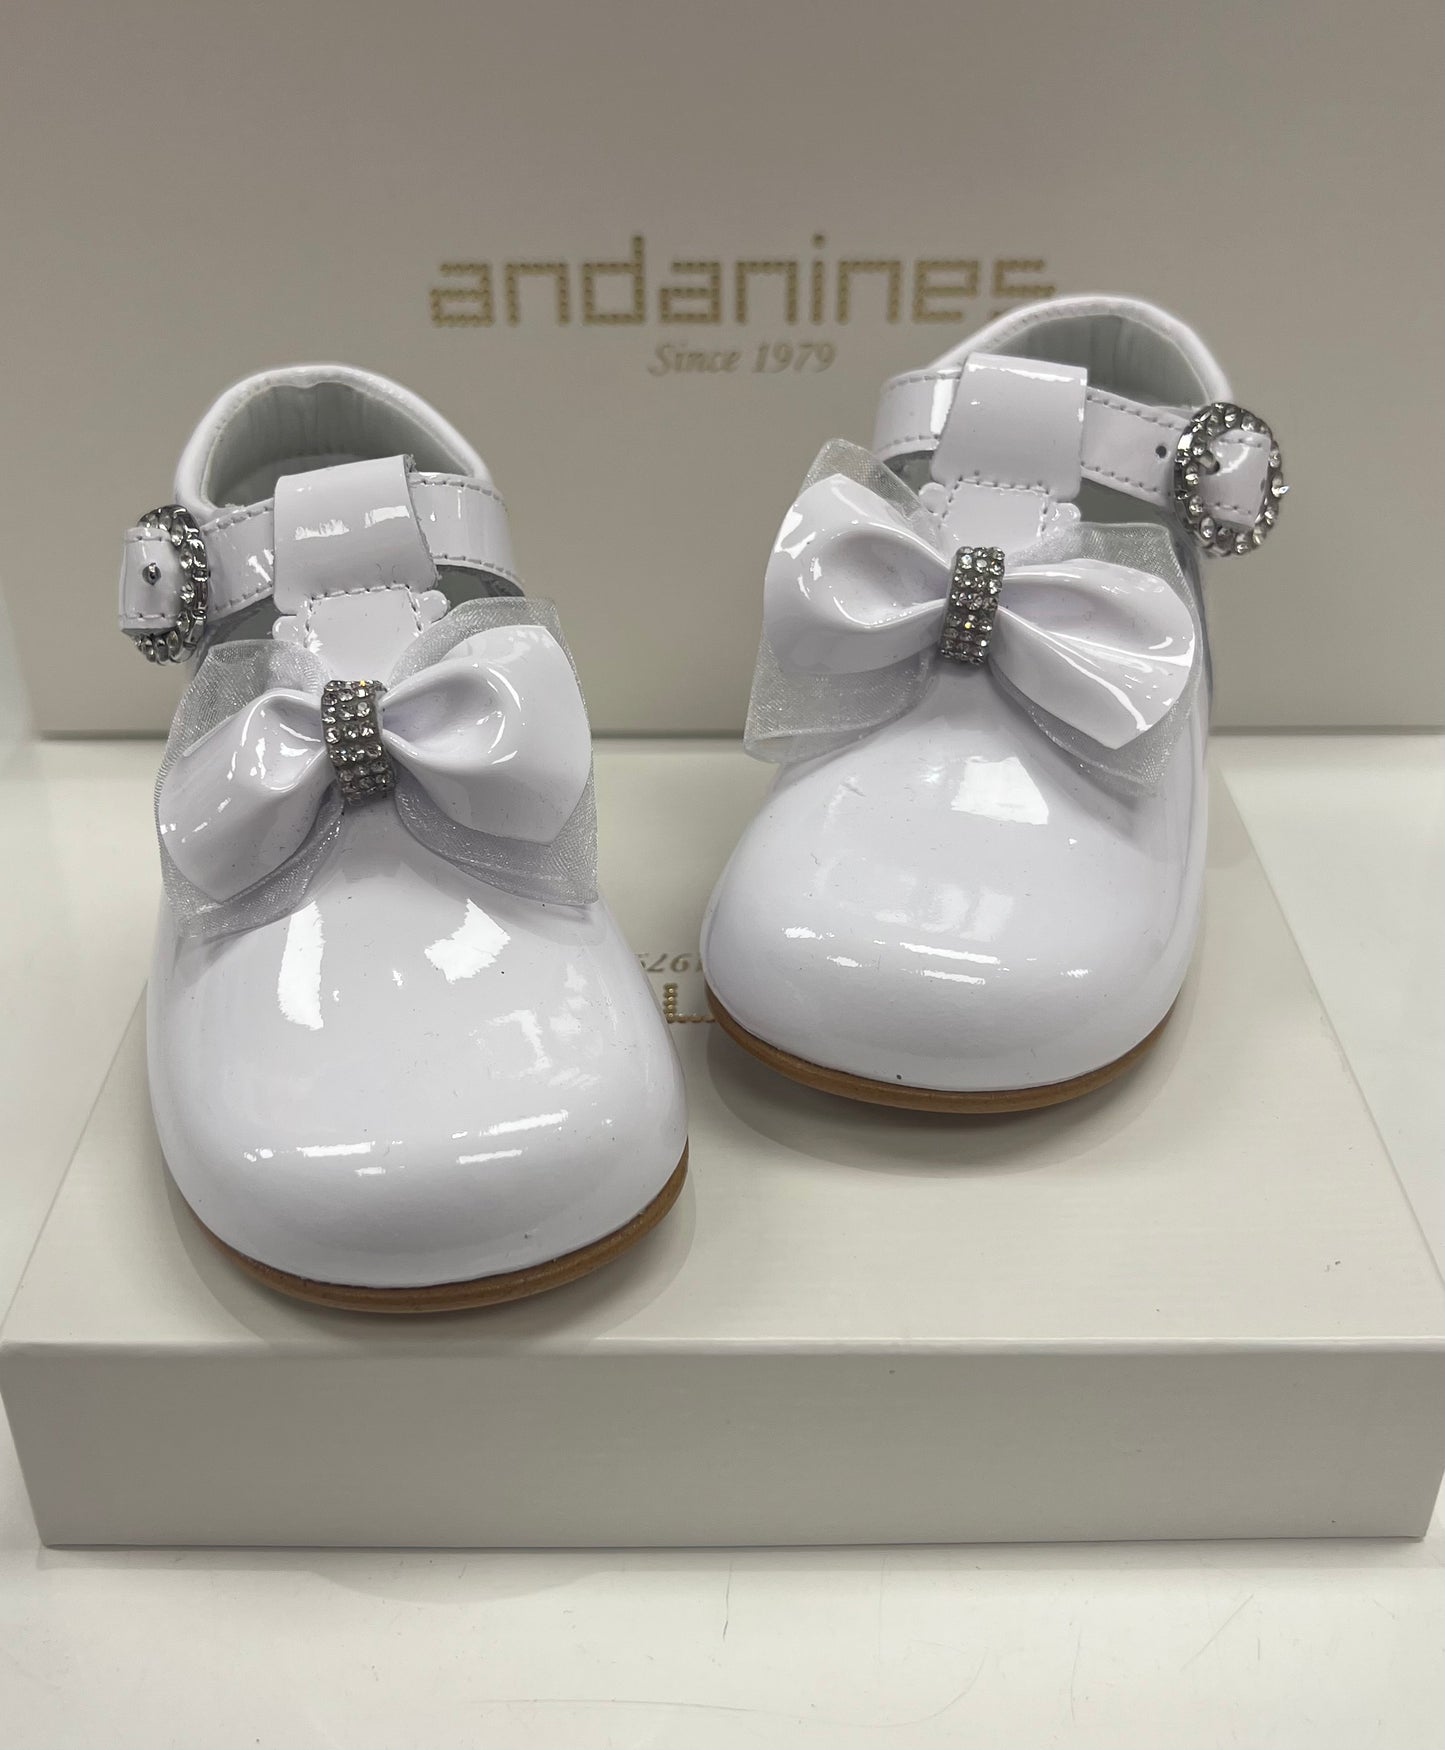 232260 Patent White Fabric/Patent Bow Andanines